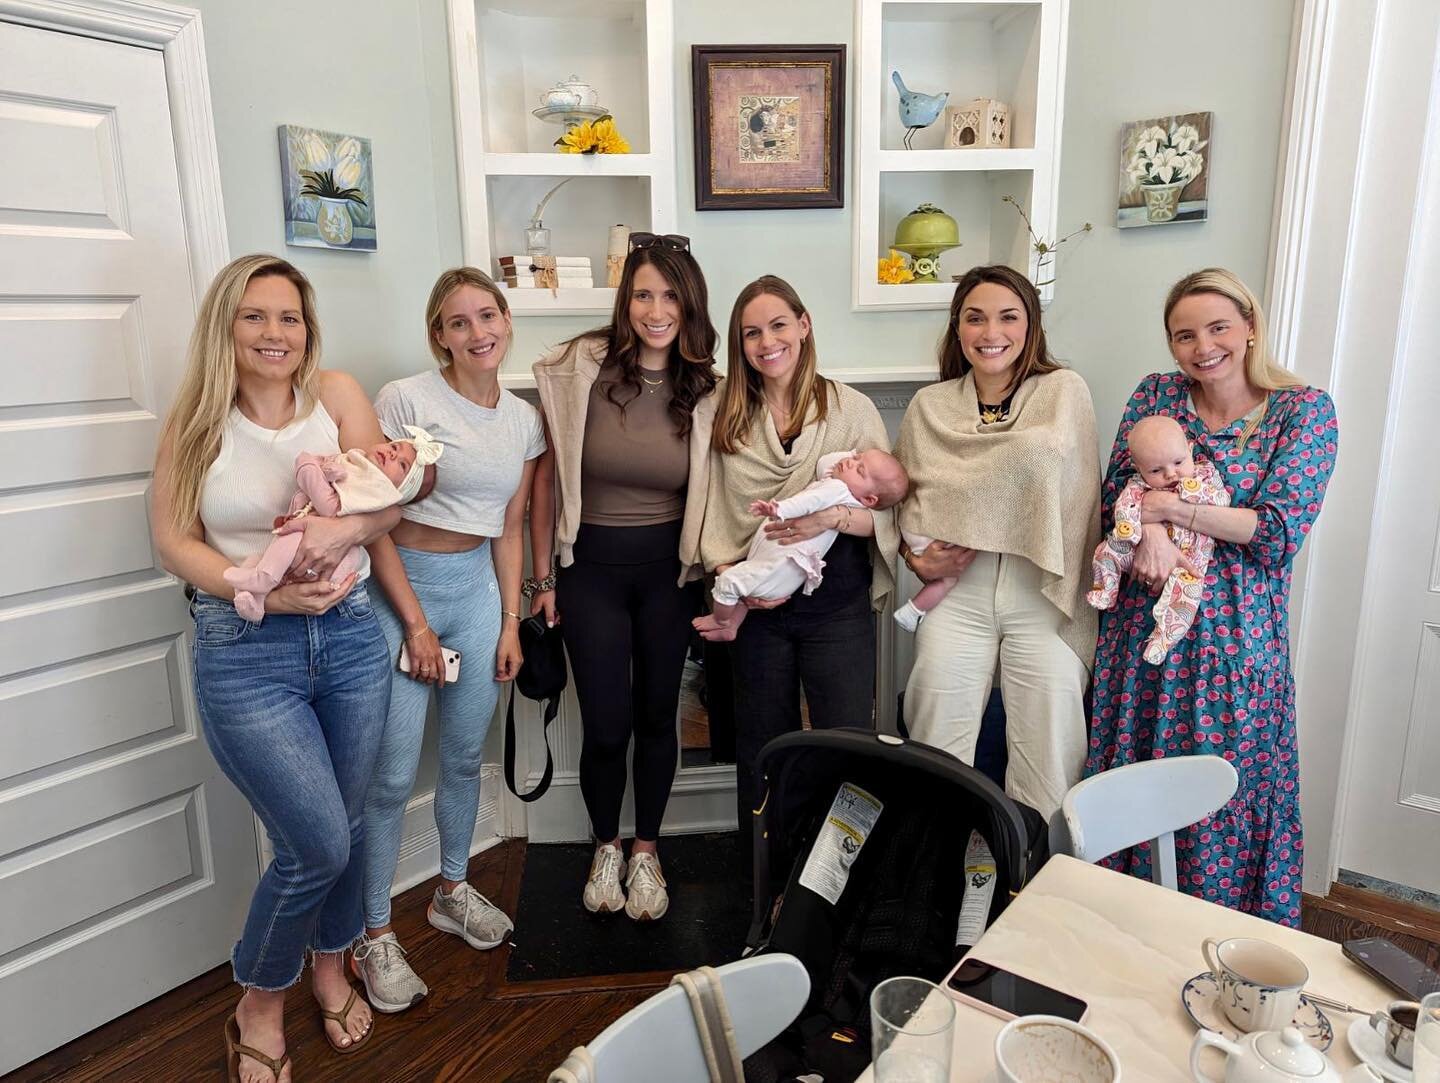 Last meeting of the March circle in Charleston. May sign up is open for mamas that had a baby in the last 2 months! #charlestonsc #charlestonmoms #mountpleasantsc #fourthtrimester #postpartumjourney 

Hosted @galadesserts and led by @jennadoula ❤️❤️